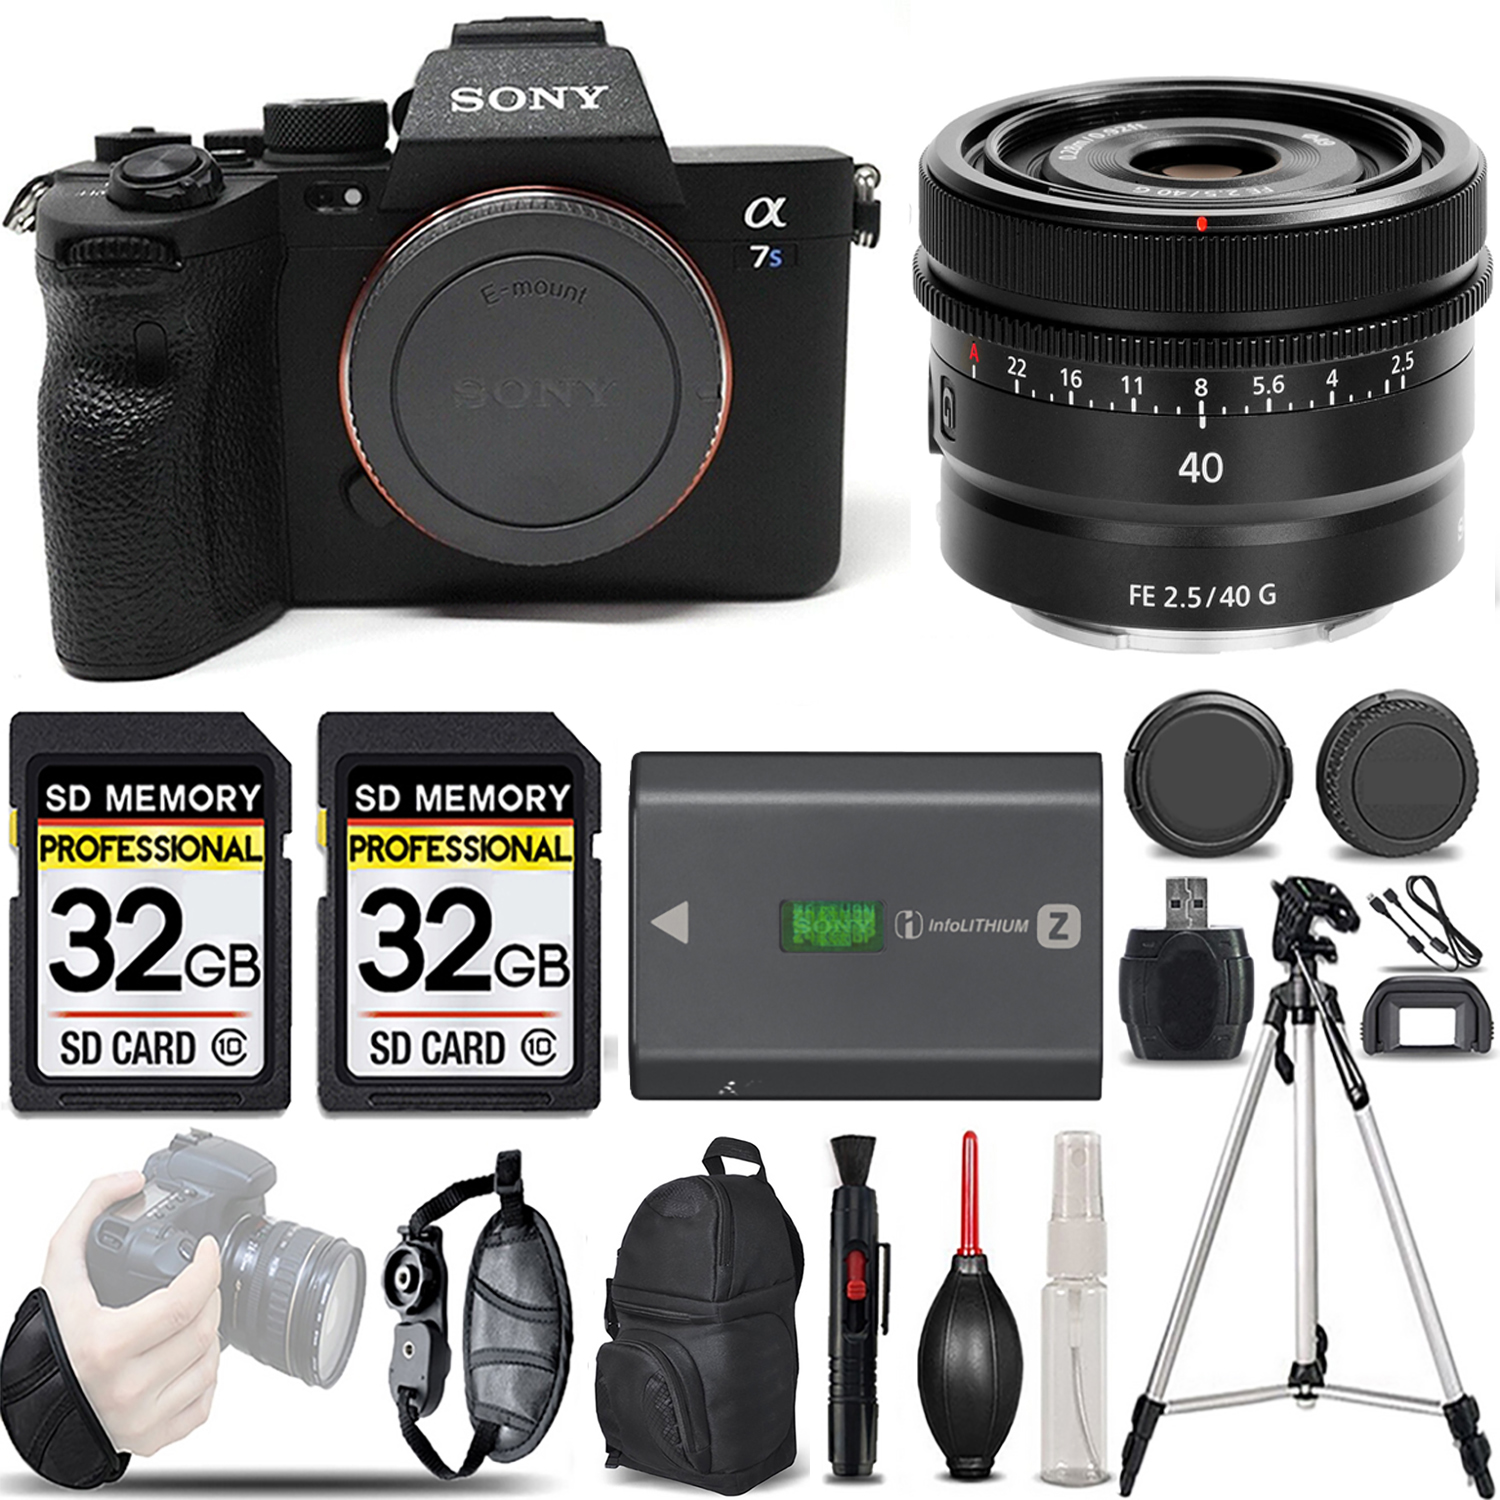 a7S III Mirrorless Camera + 40mm Lens + Extra Battery + 64GB -Basic Kit *FREE SHIPPING*